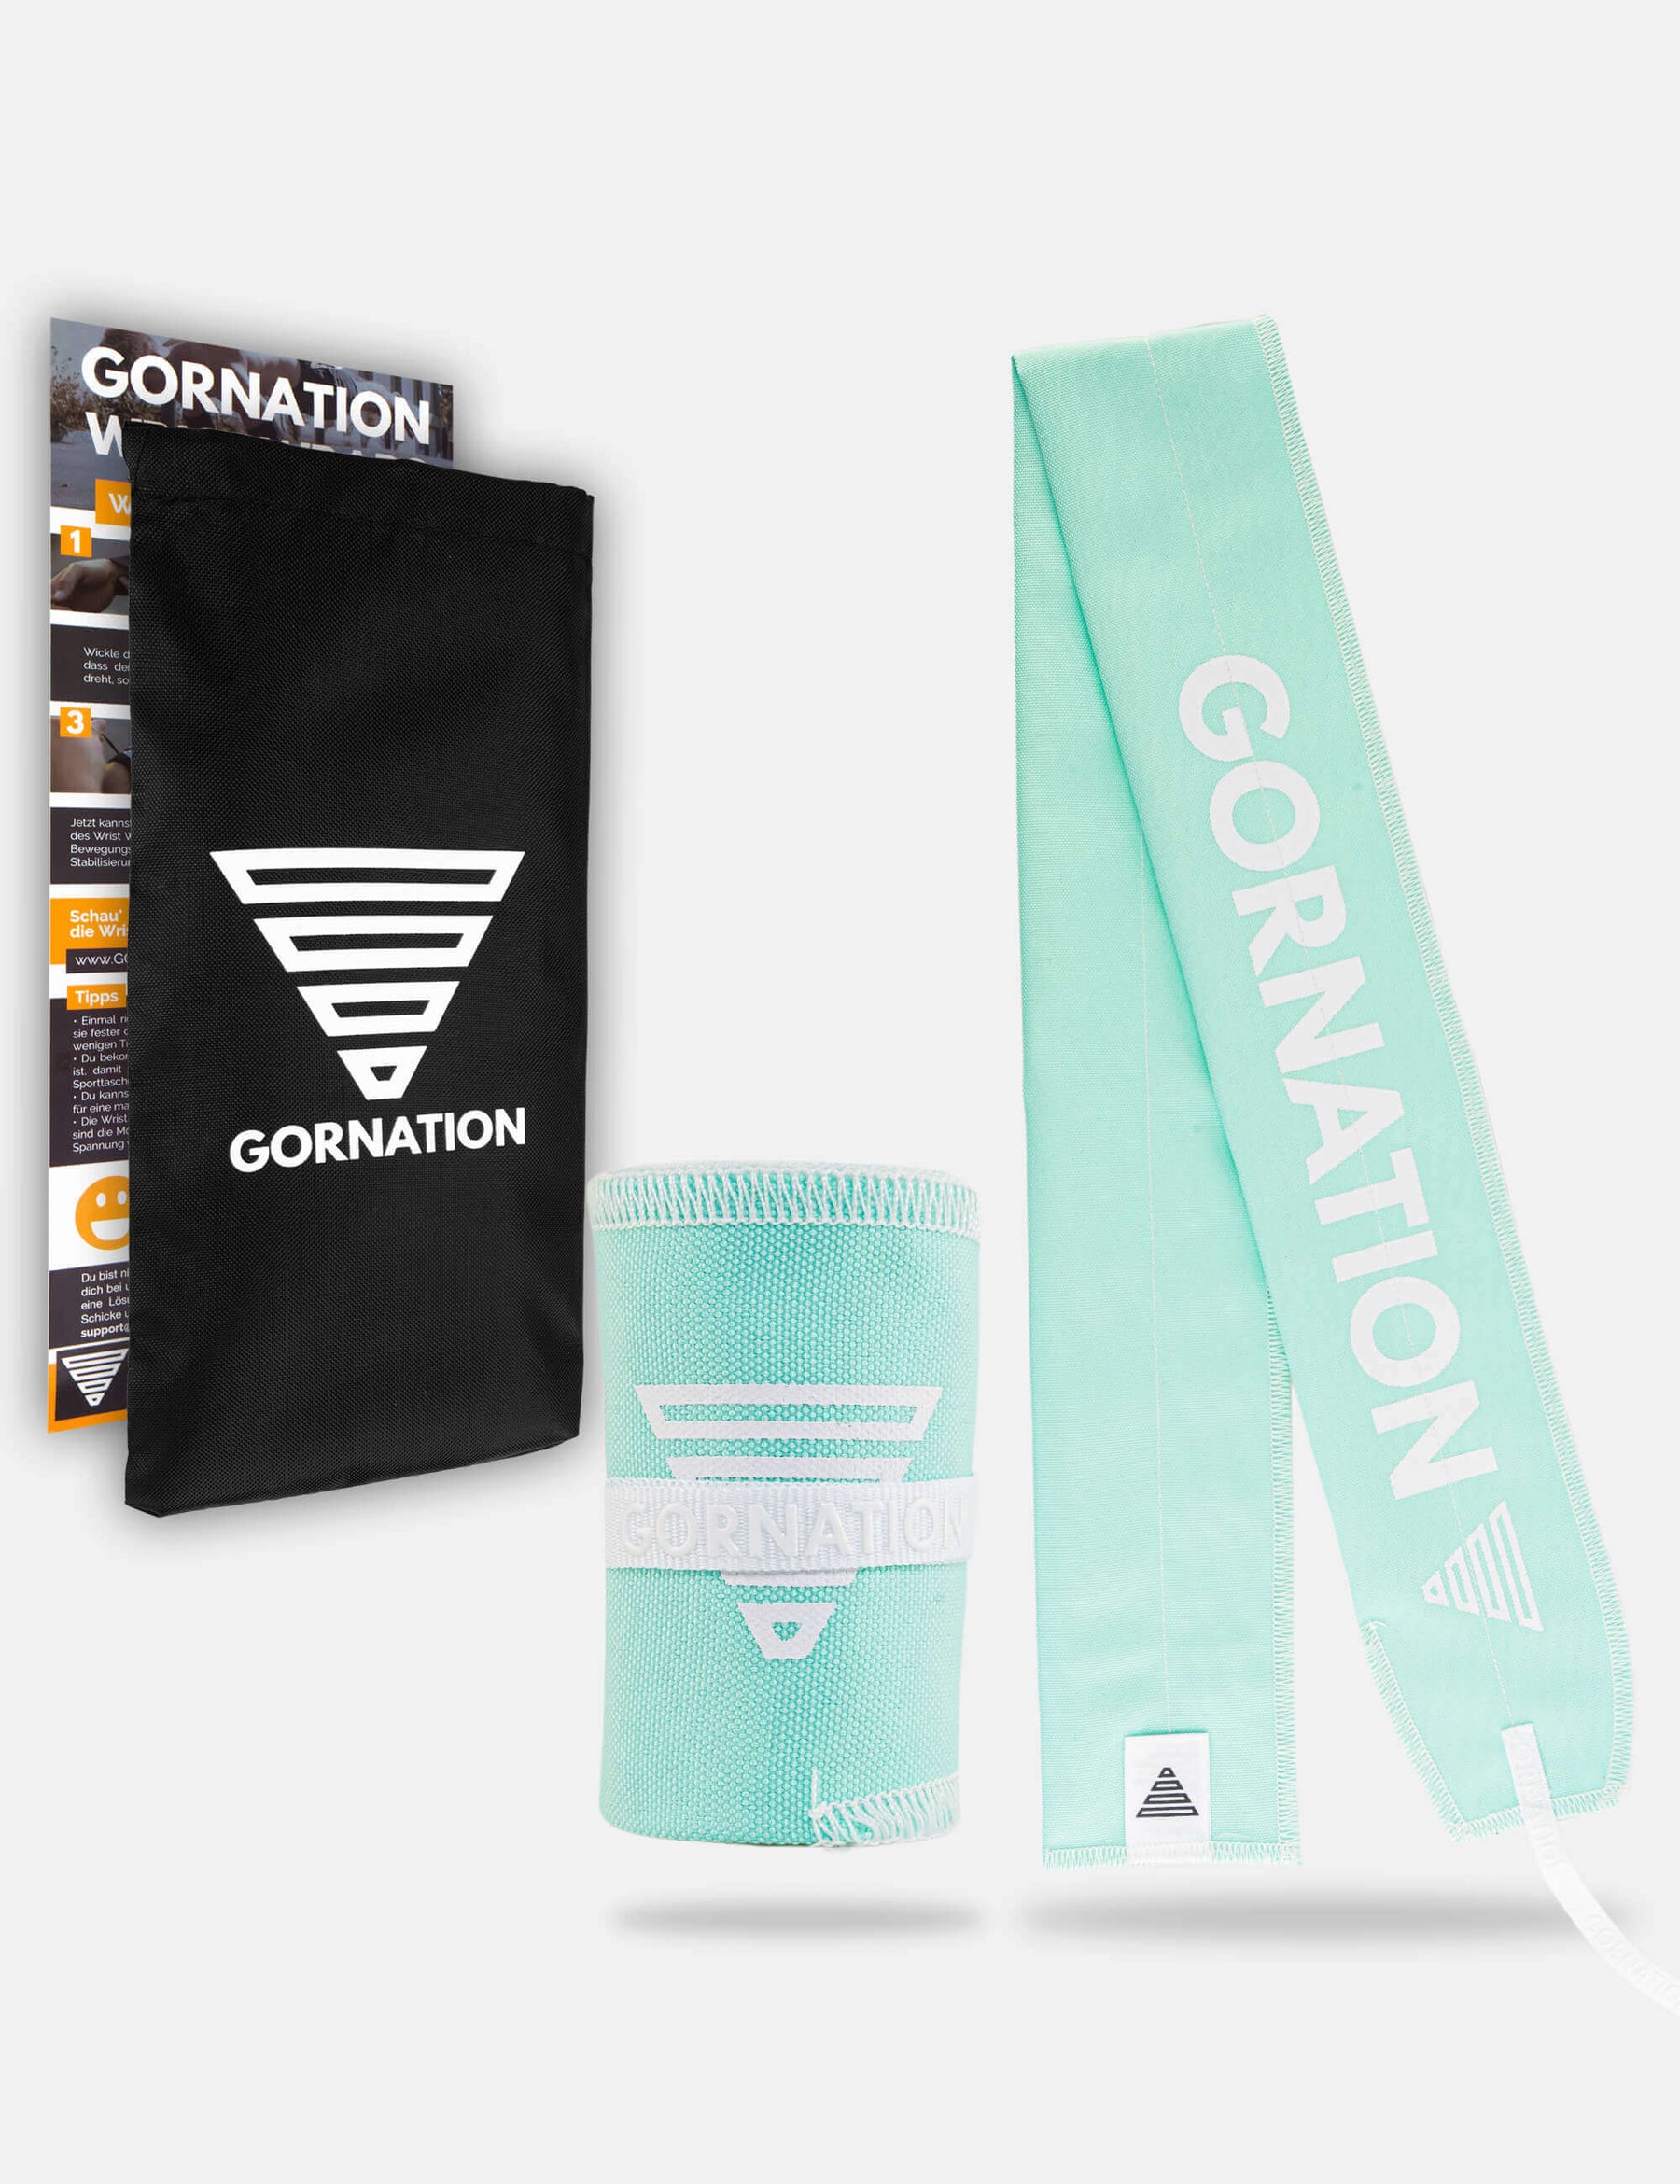 Mint wrist wrap from Gornation for extra stability and injury prevention. And black cary bag.